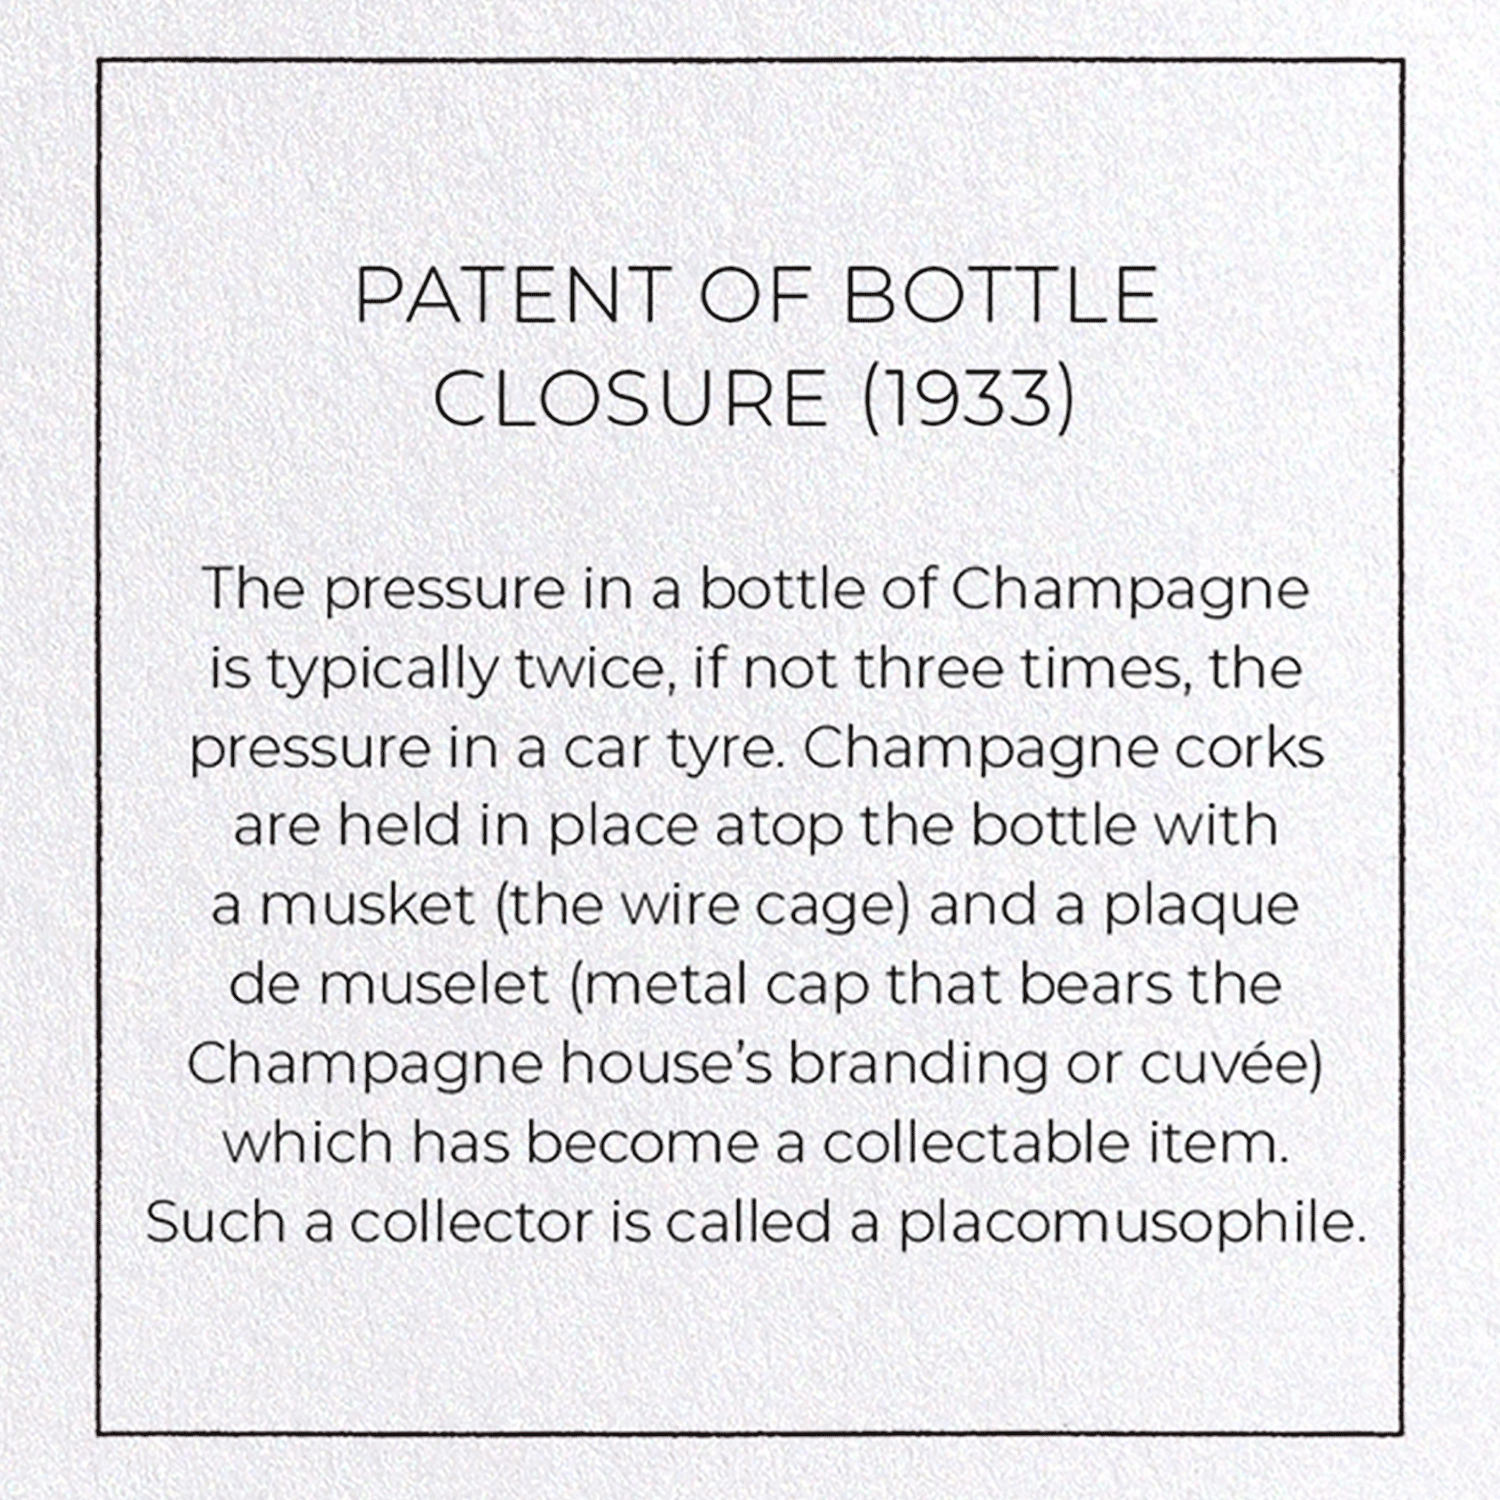 PATENT OF BOTTLE CLOSURE (1933): Patent Greeting Card